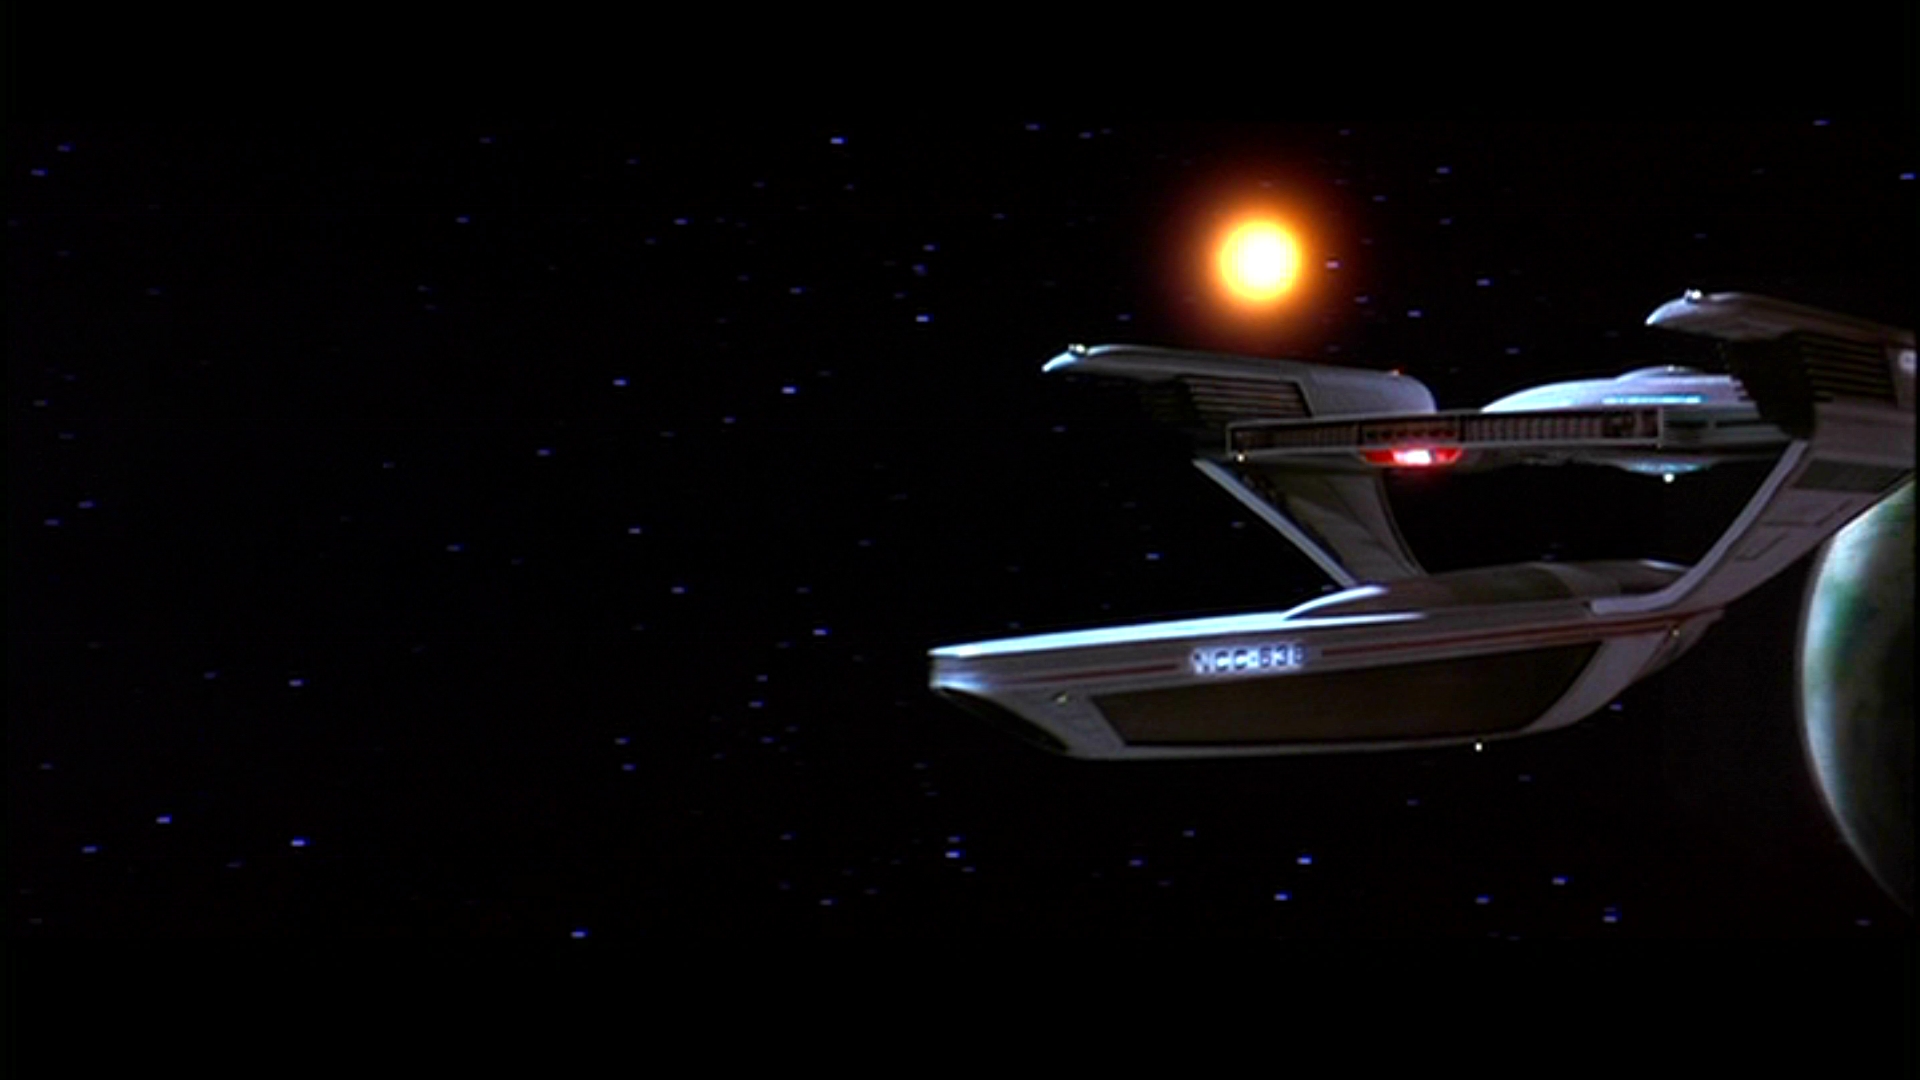 Movie Star Trek Iii The Search For Spock Wallpaper